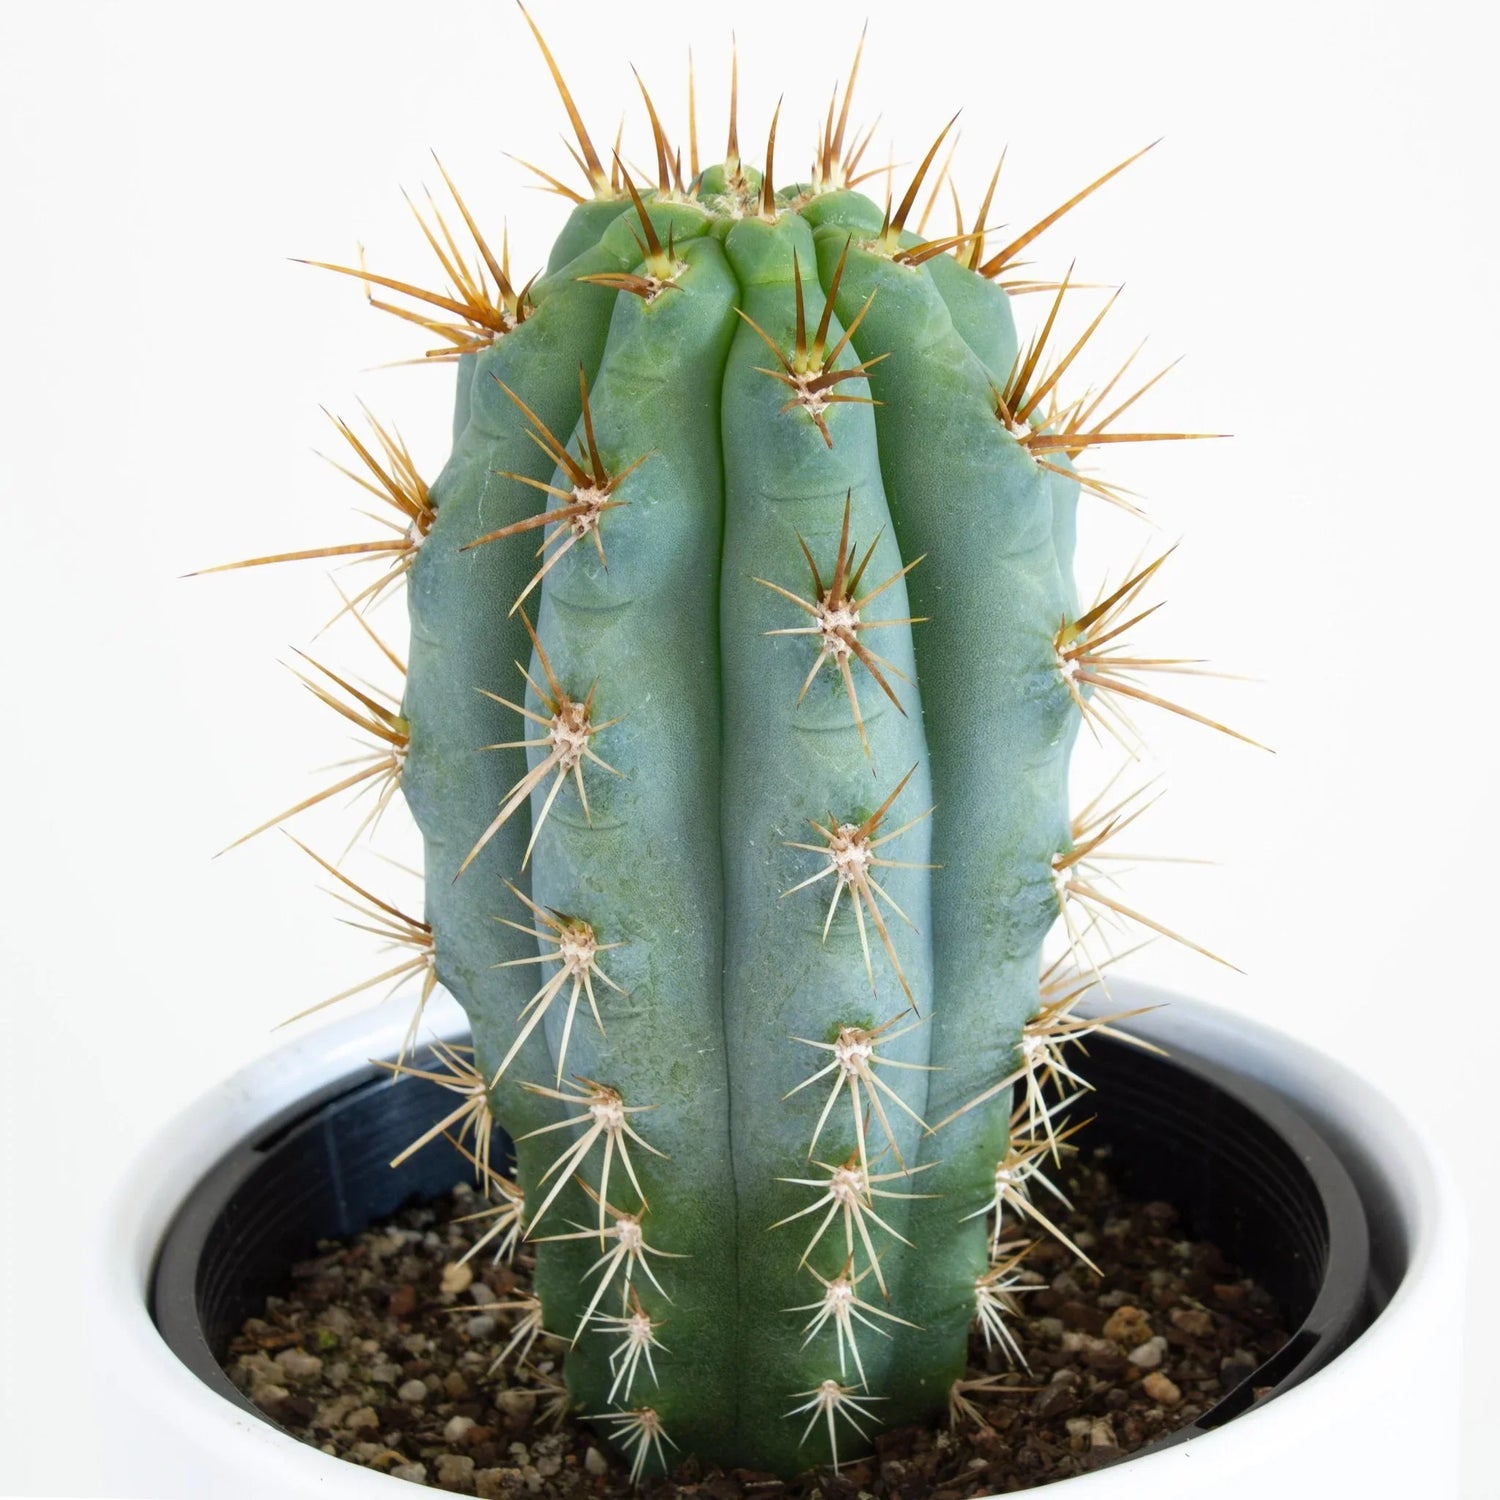 Cactus 'Blue Torch' - Urban Sprouts